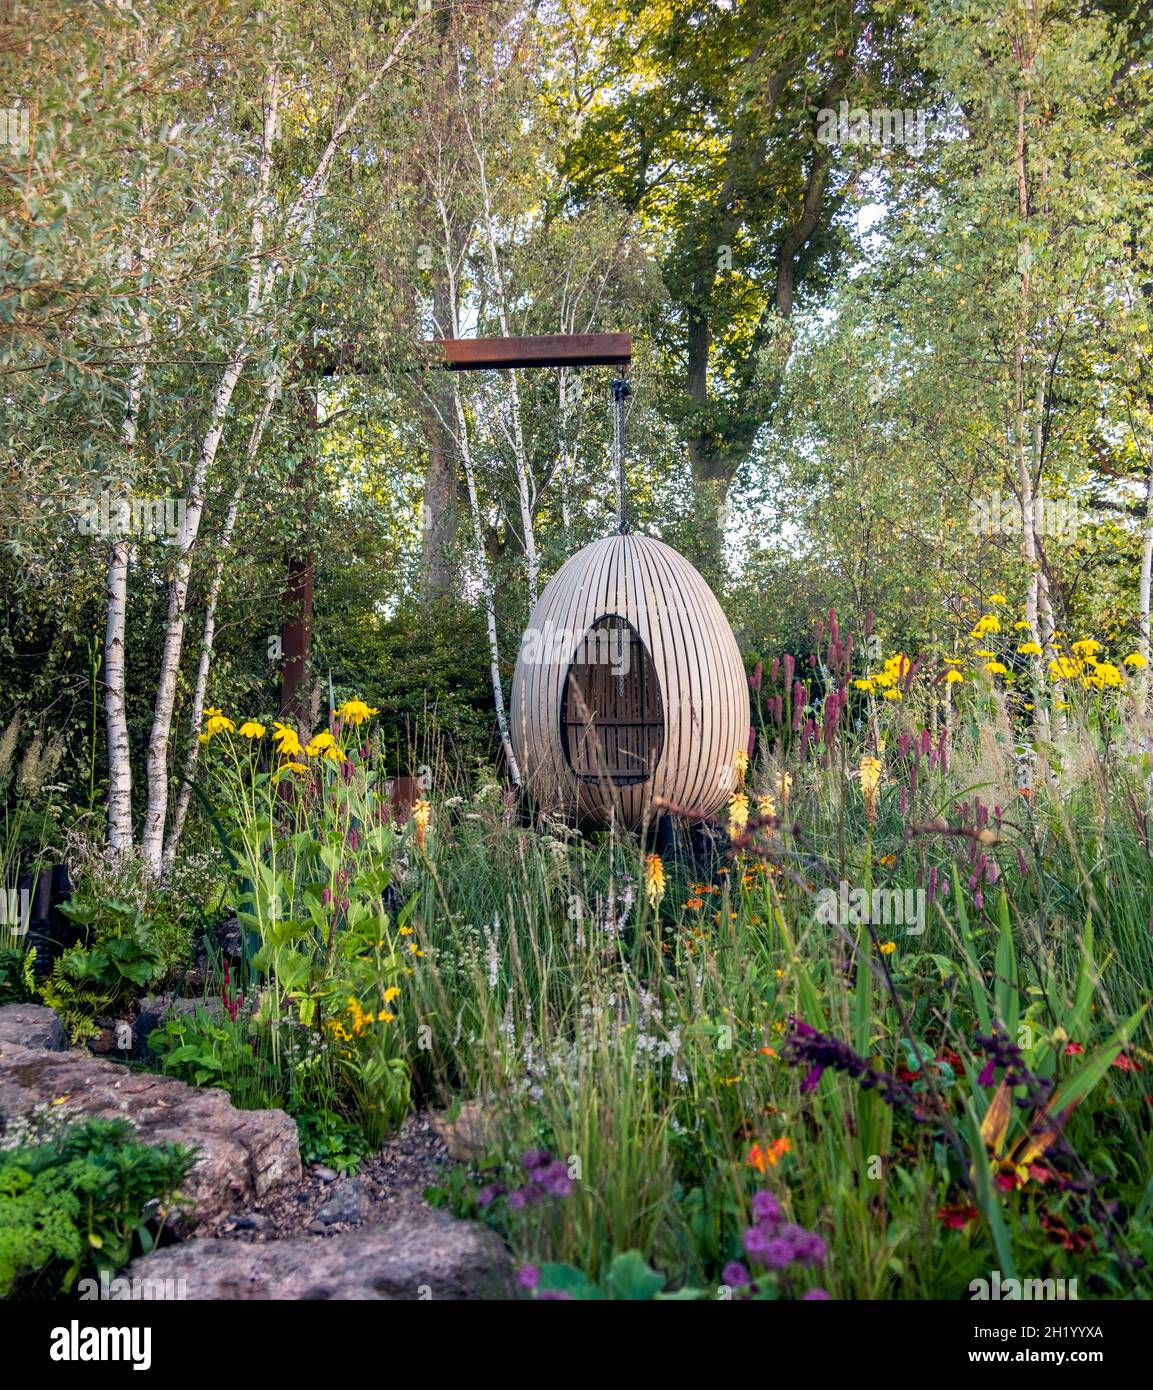 The Yeo Valley Organic Garden at the Chelsea flower show 2021 in London, UK. Stock Photo